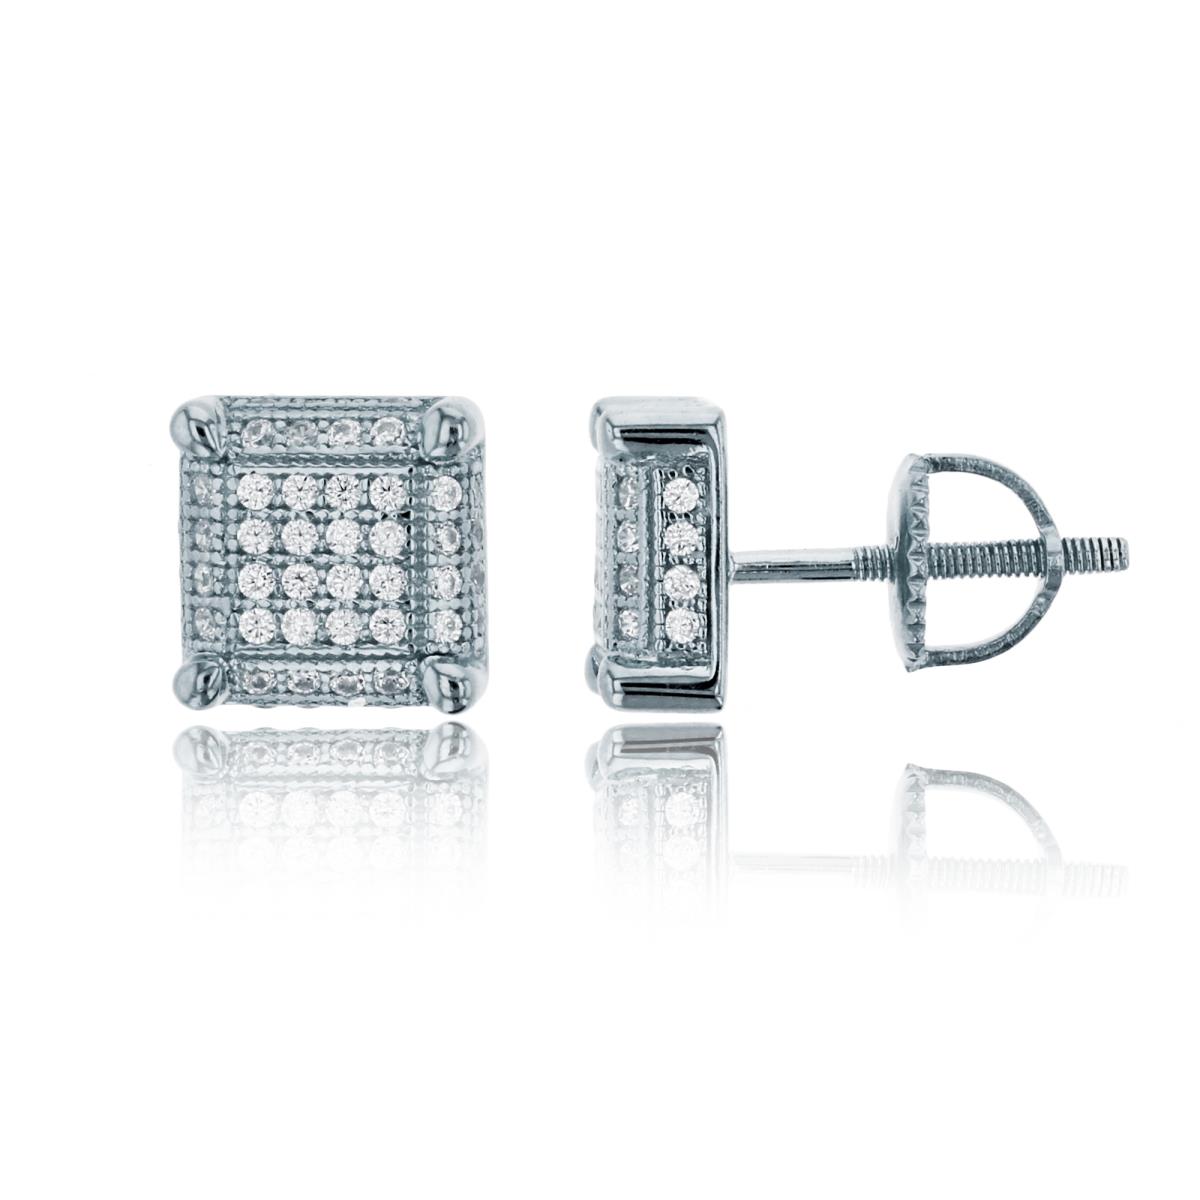 Sterling Silver Rhodium Polished 8mm Micropave Square Screw-Back Stud Earring